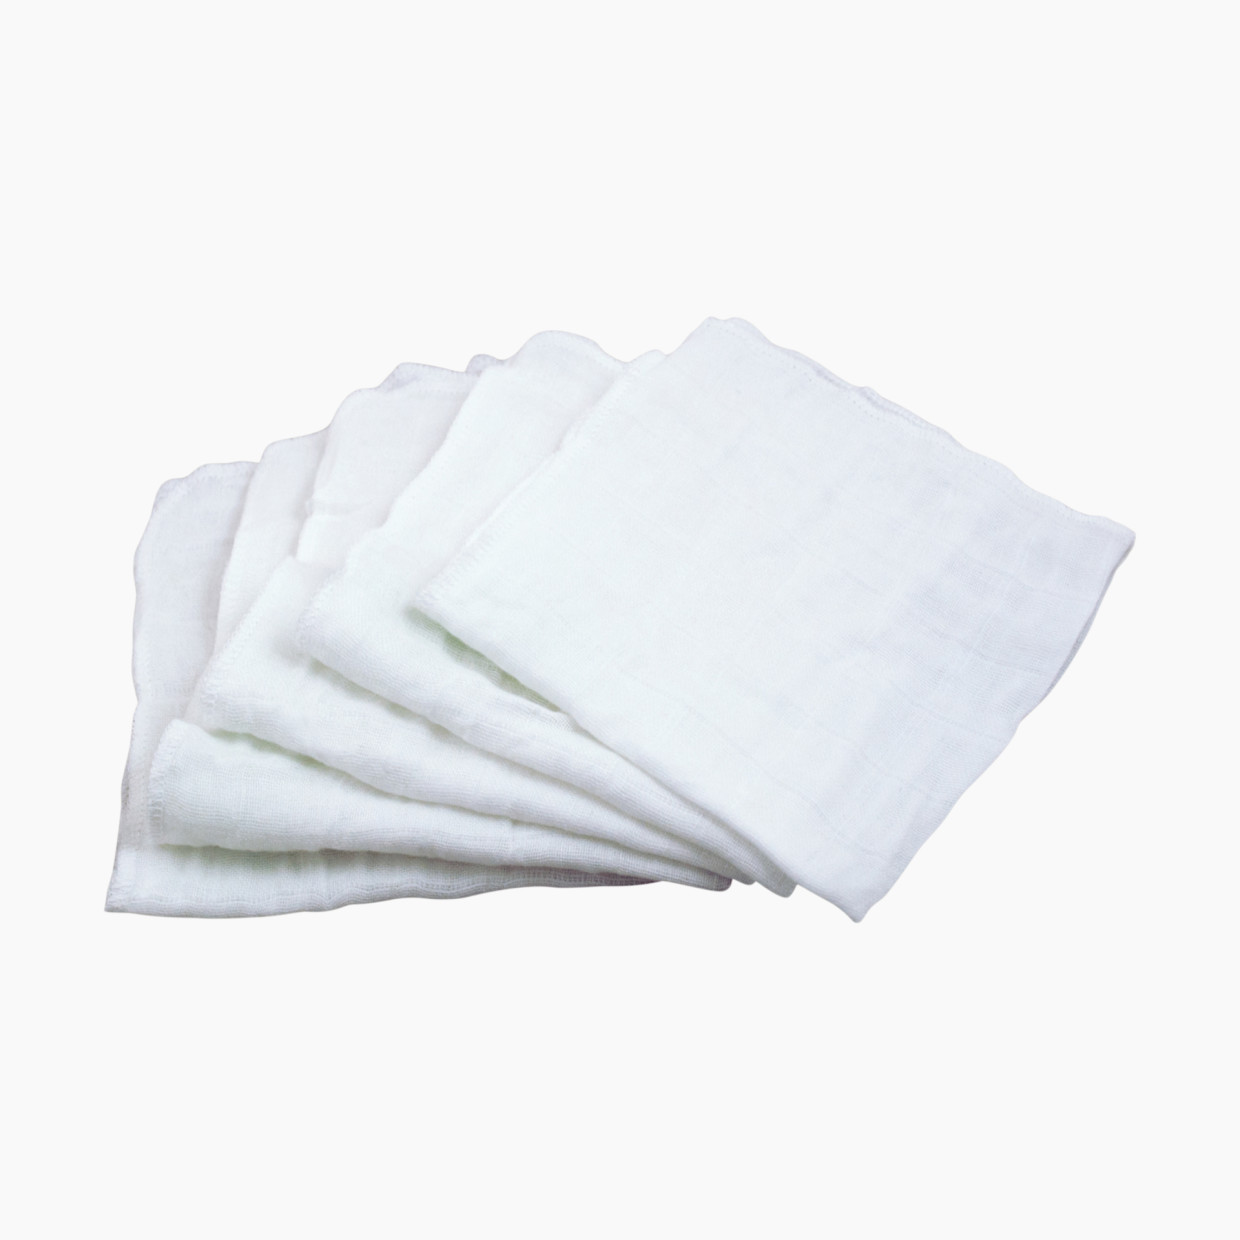 GREEN SPROUTS Muslin Cloths (5 Pack) - White.